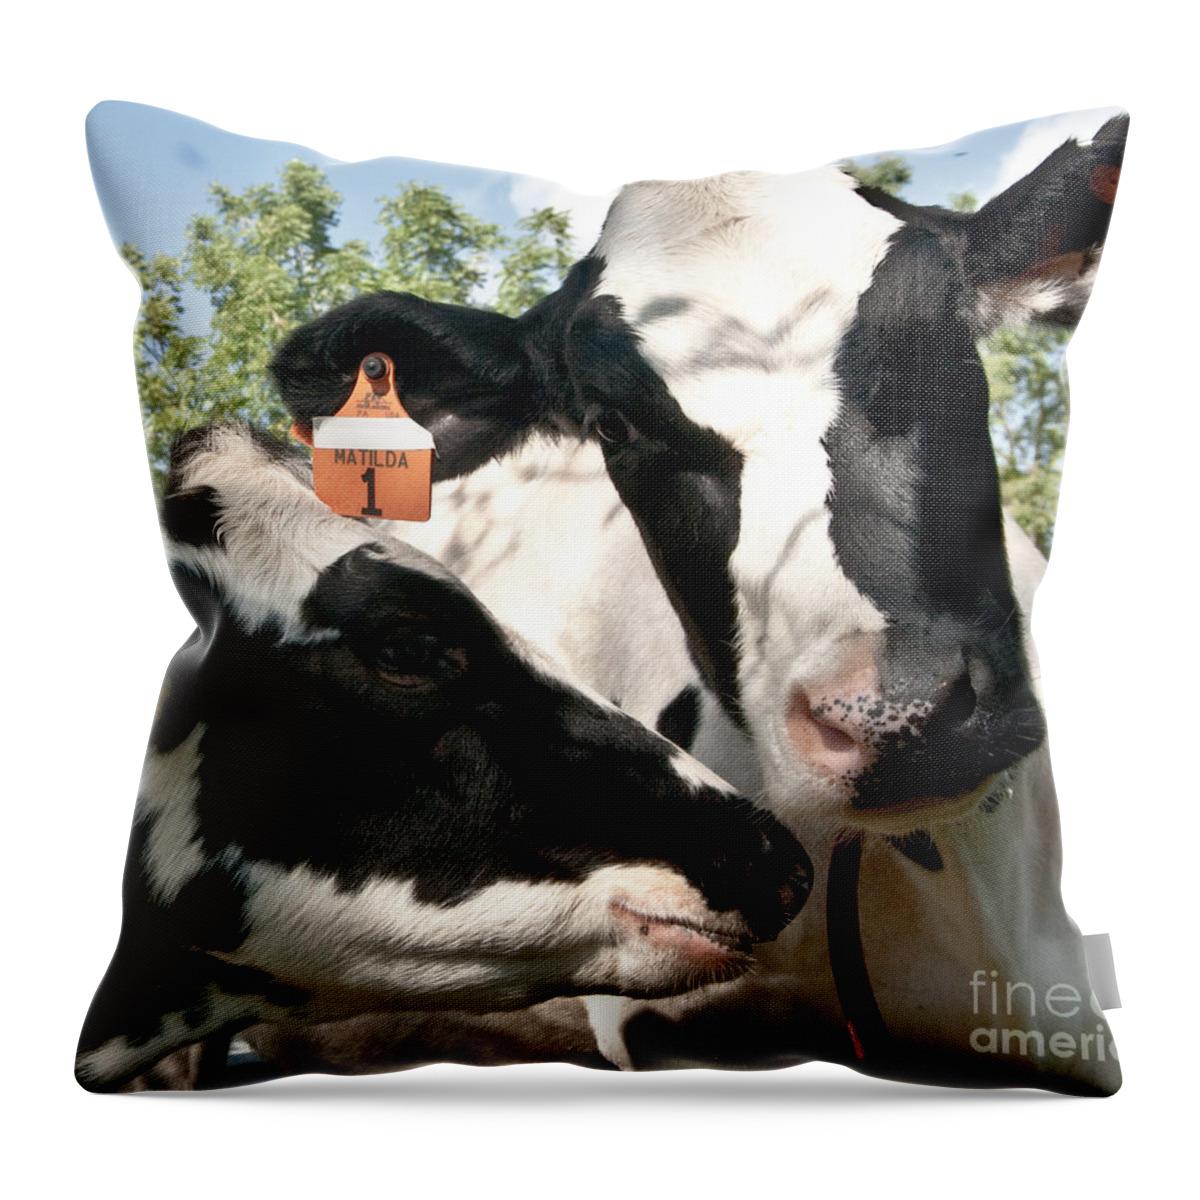 Cow Digital Photography Throw Pillow featuring the digital art Zoey and Matilda by Danielle Summa